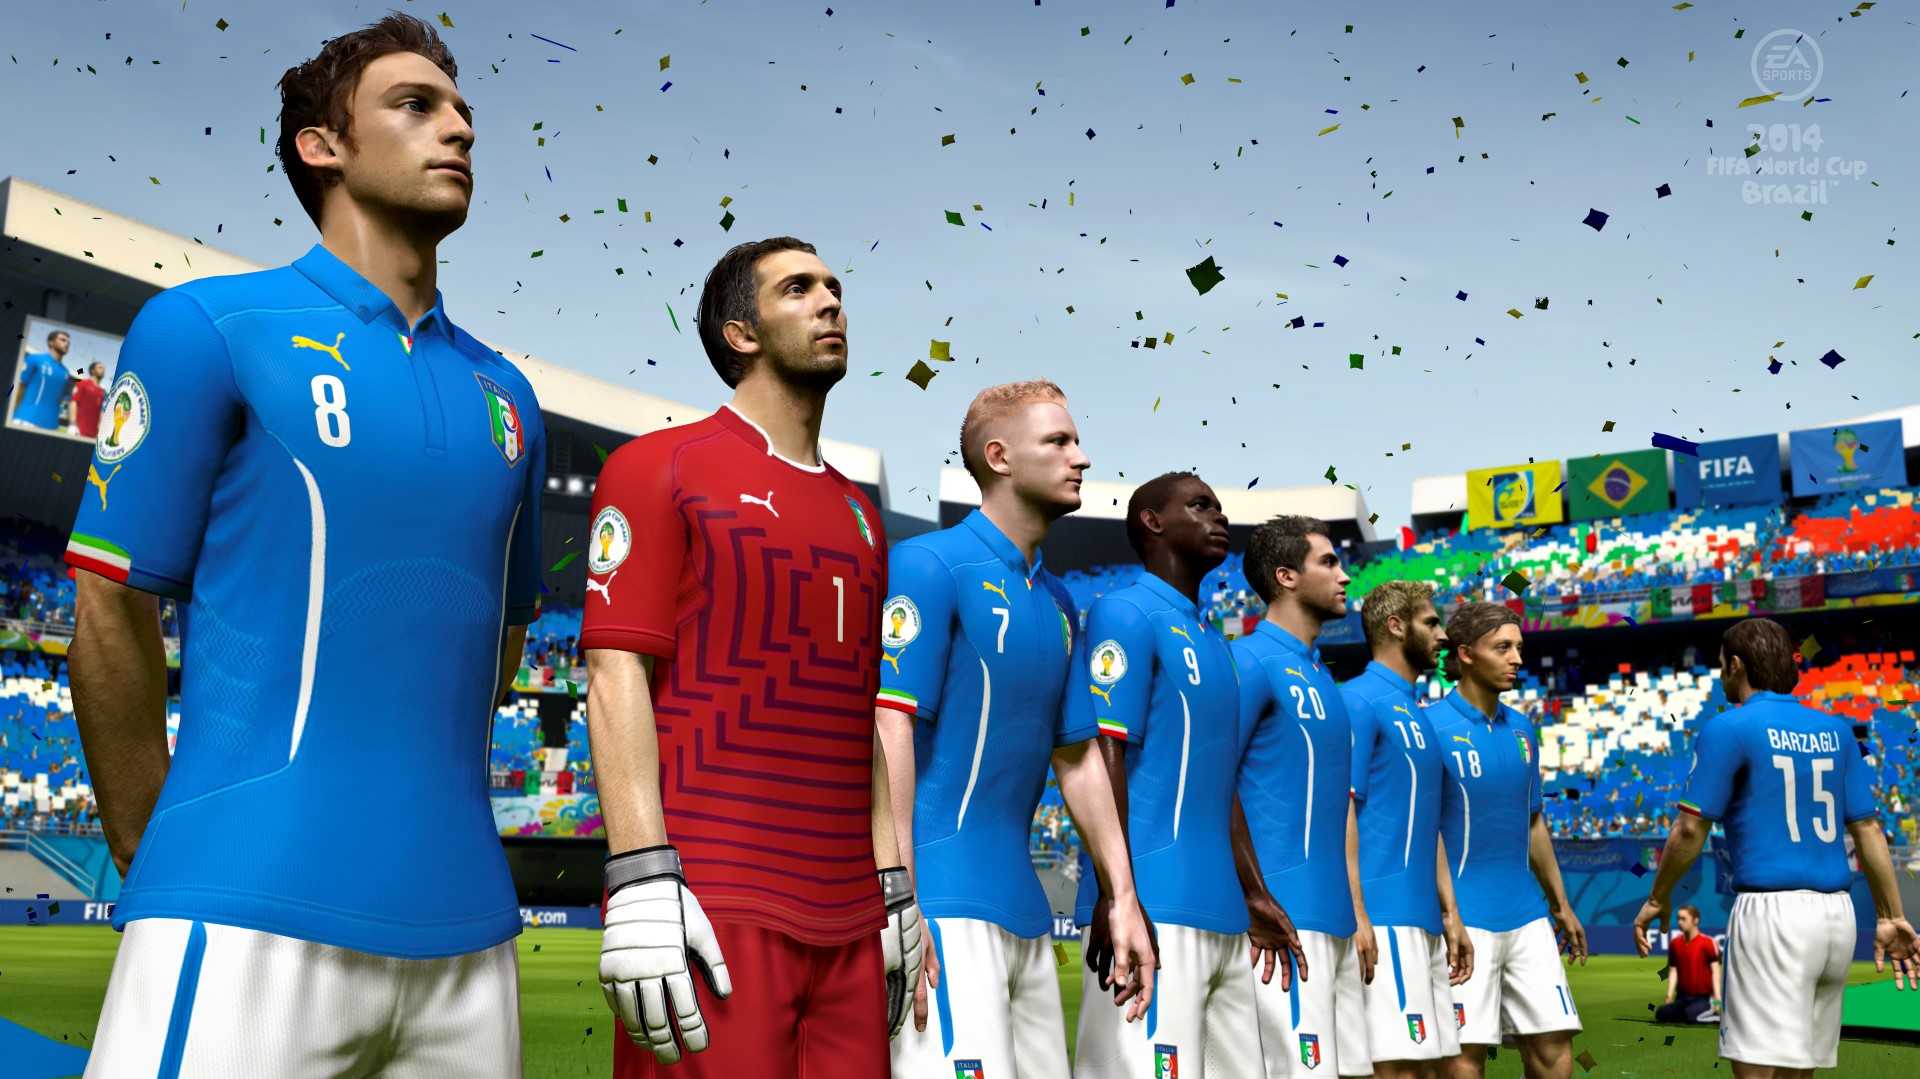 fifa 14 world cup patch download tpb